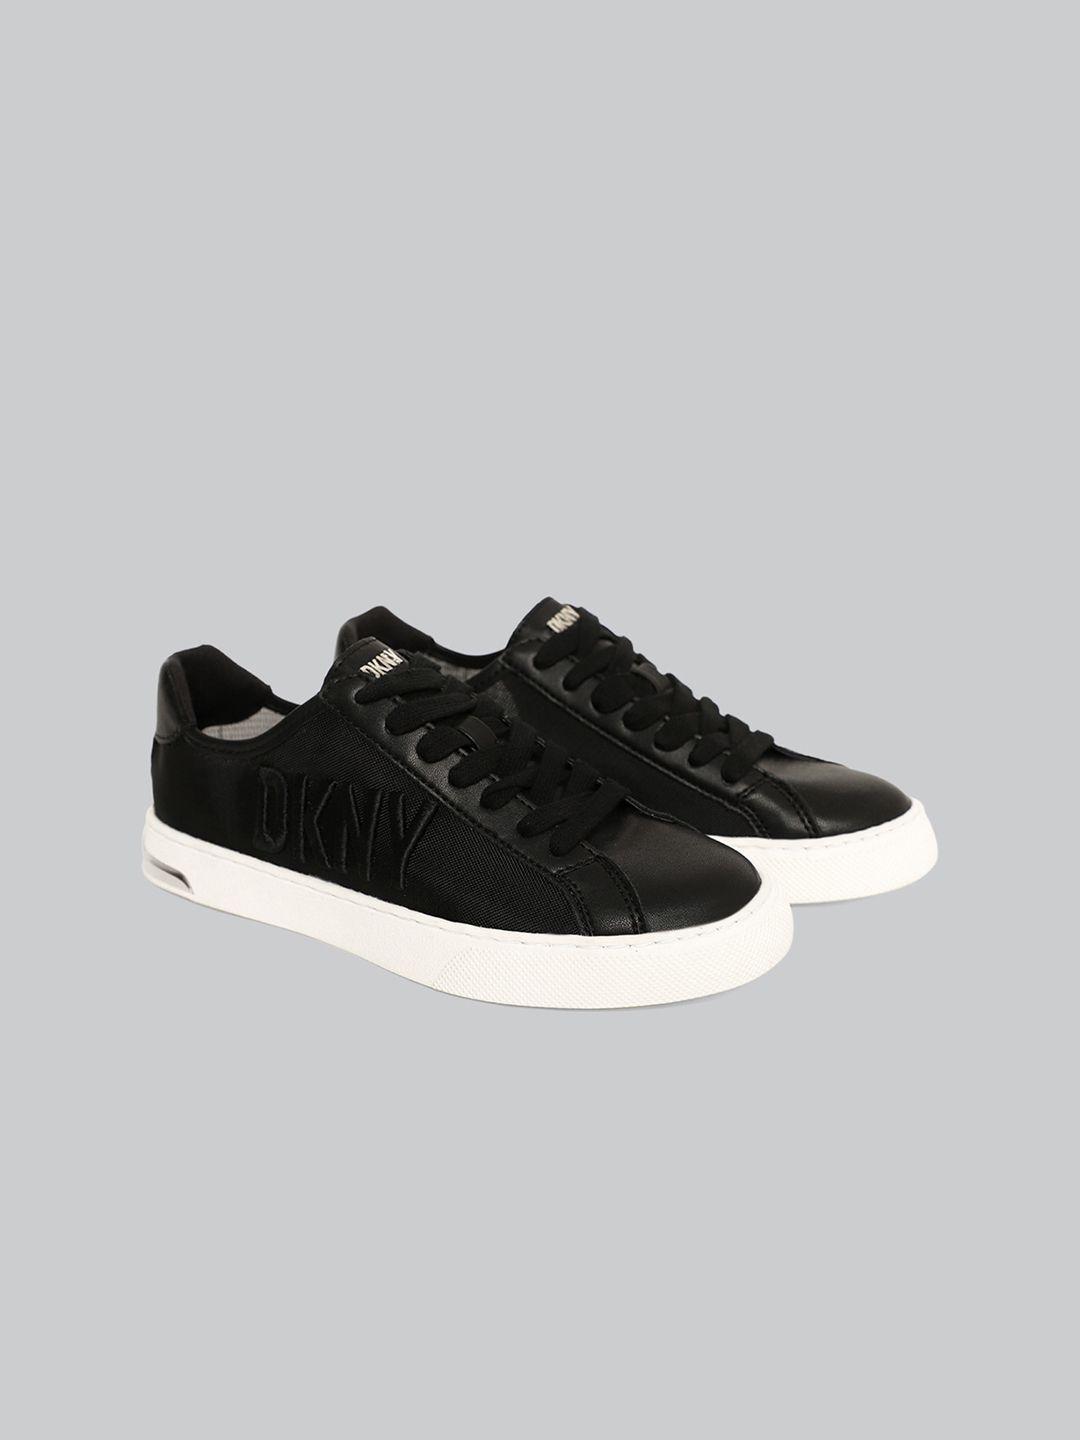 dkny women textured round toe lace-up sneakers